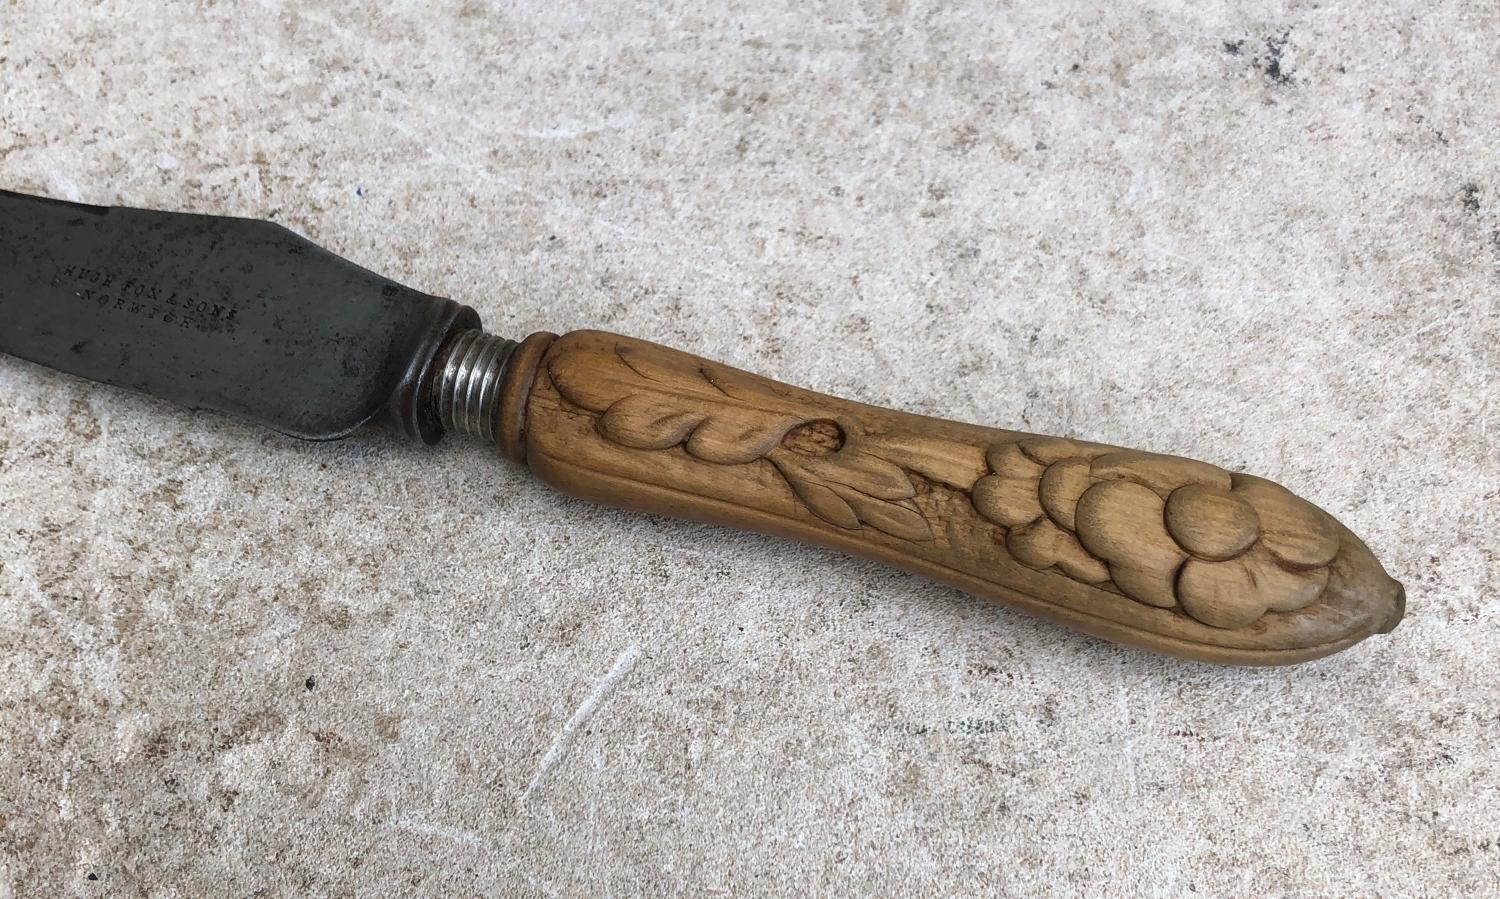 Late Victorian Bread Knife with Carved Handle - Norwich Stamp